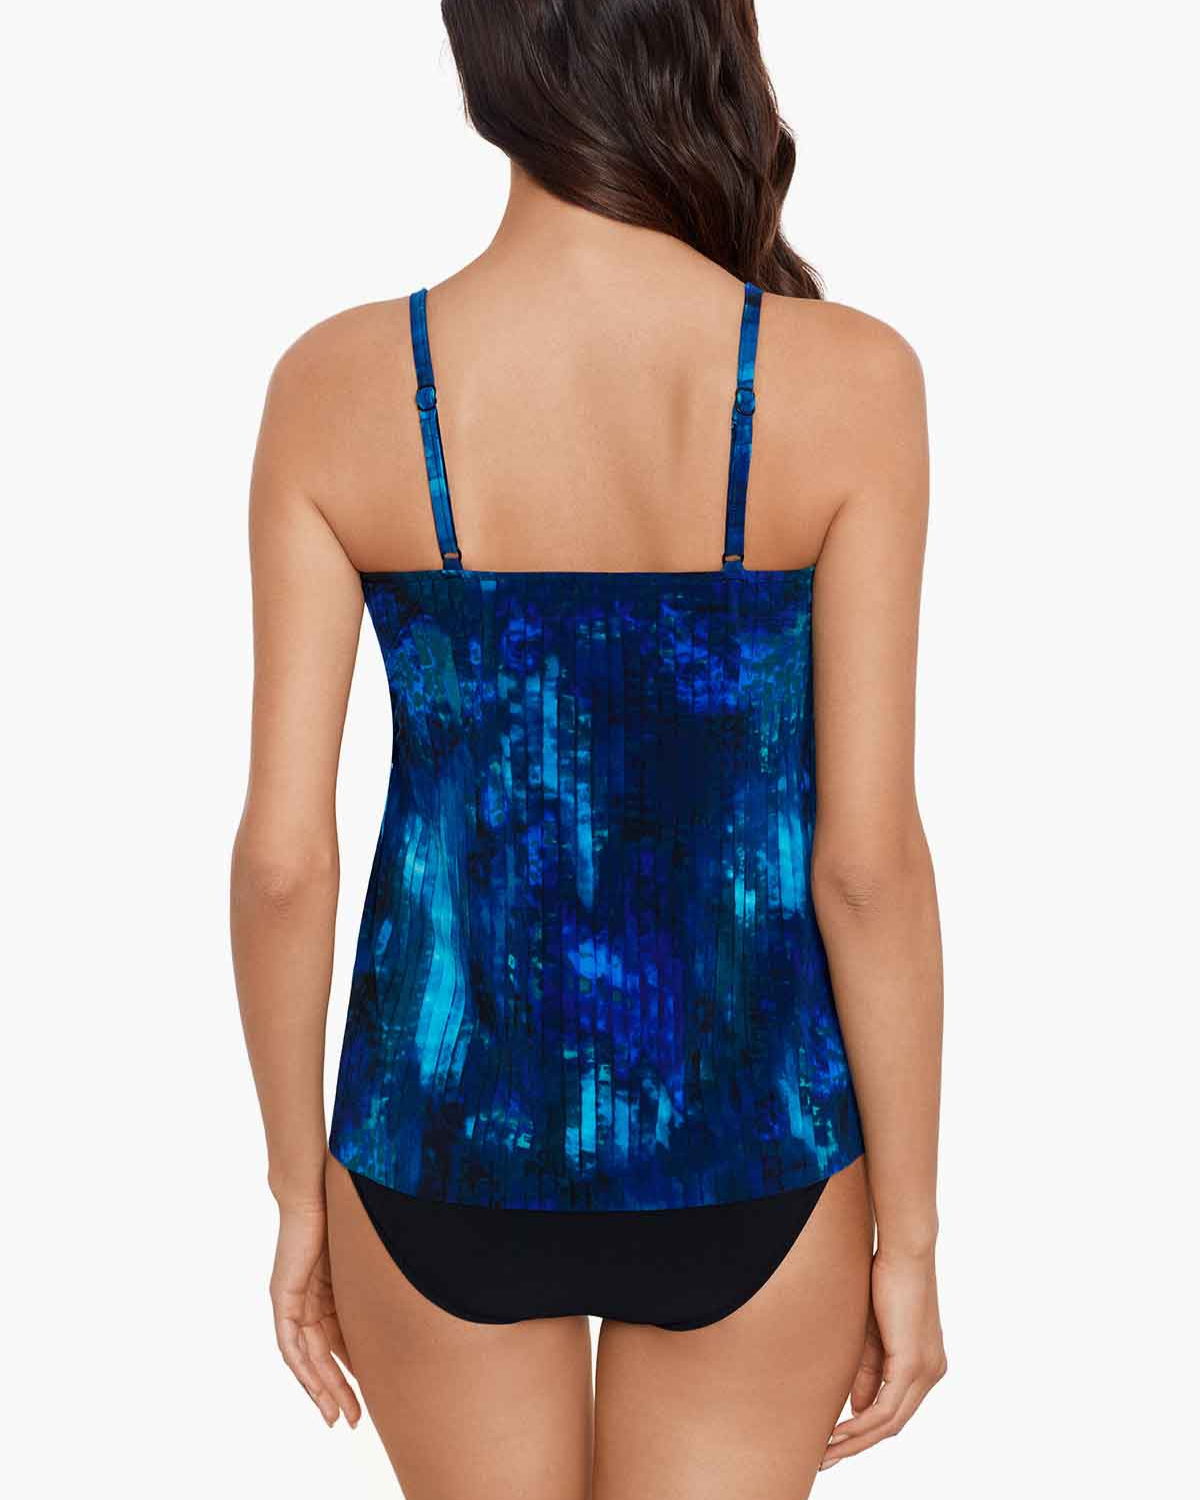 Model wearing a tankini top with adjustable straps in and abstract blue, black and navy 